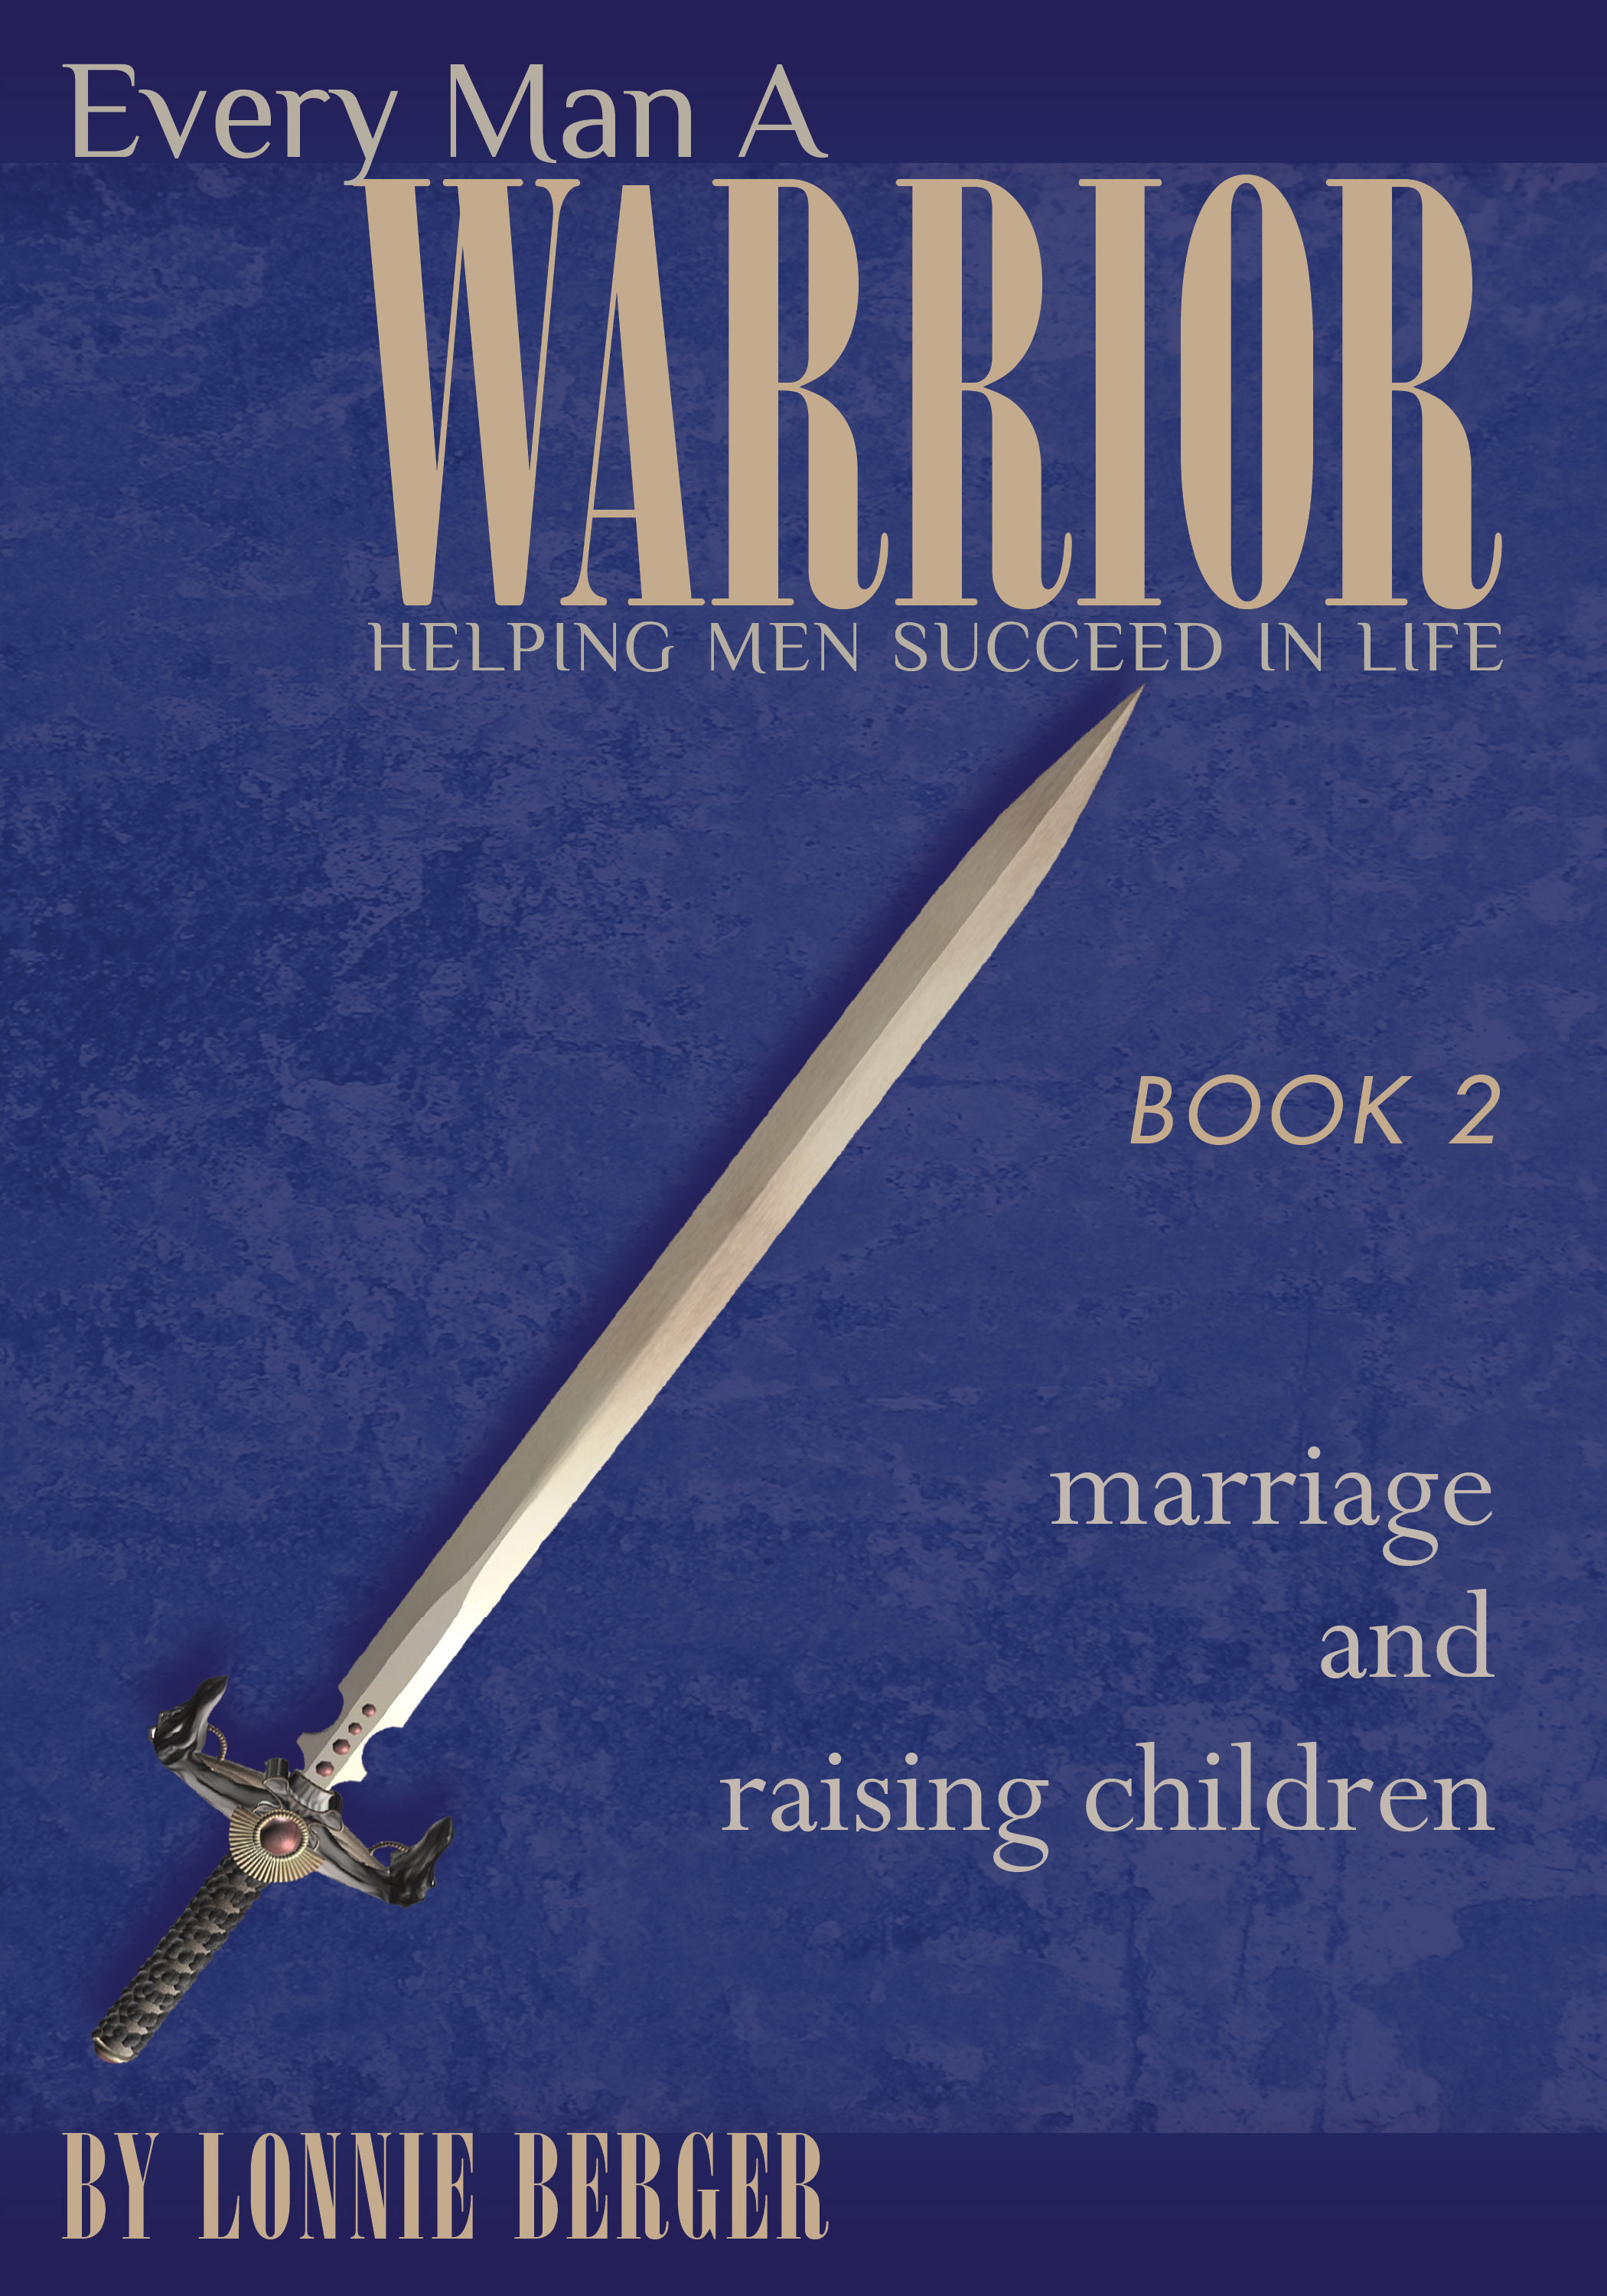 Book Two: Marriage and Raising Children